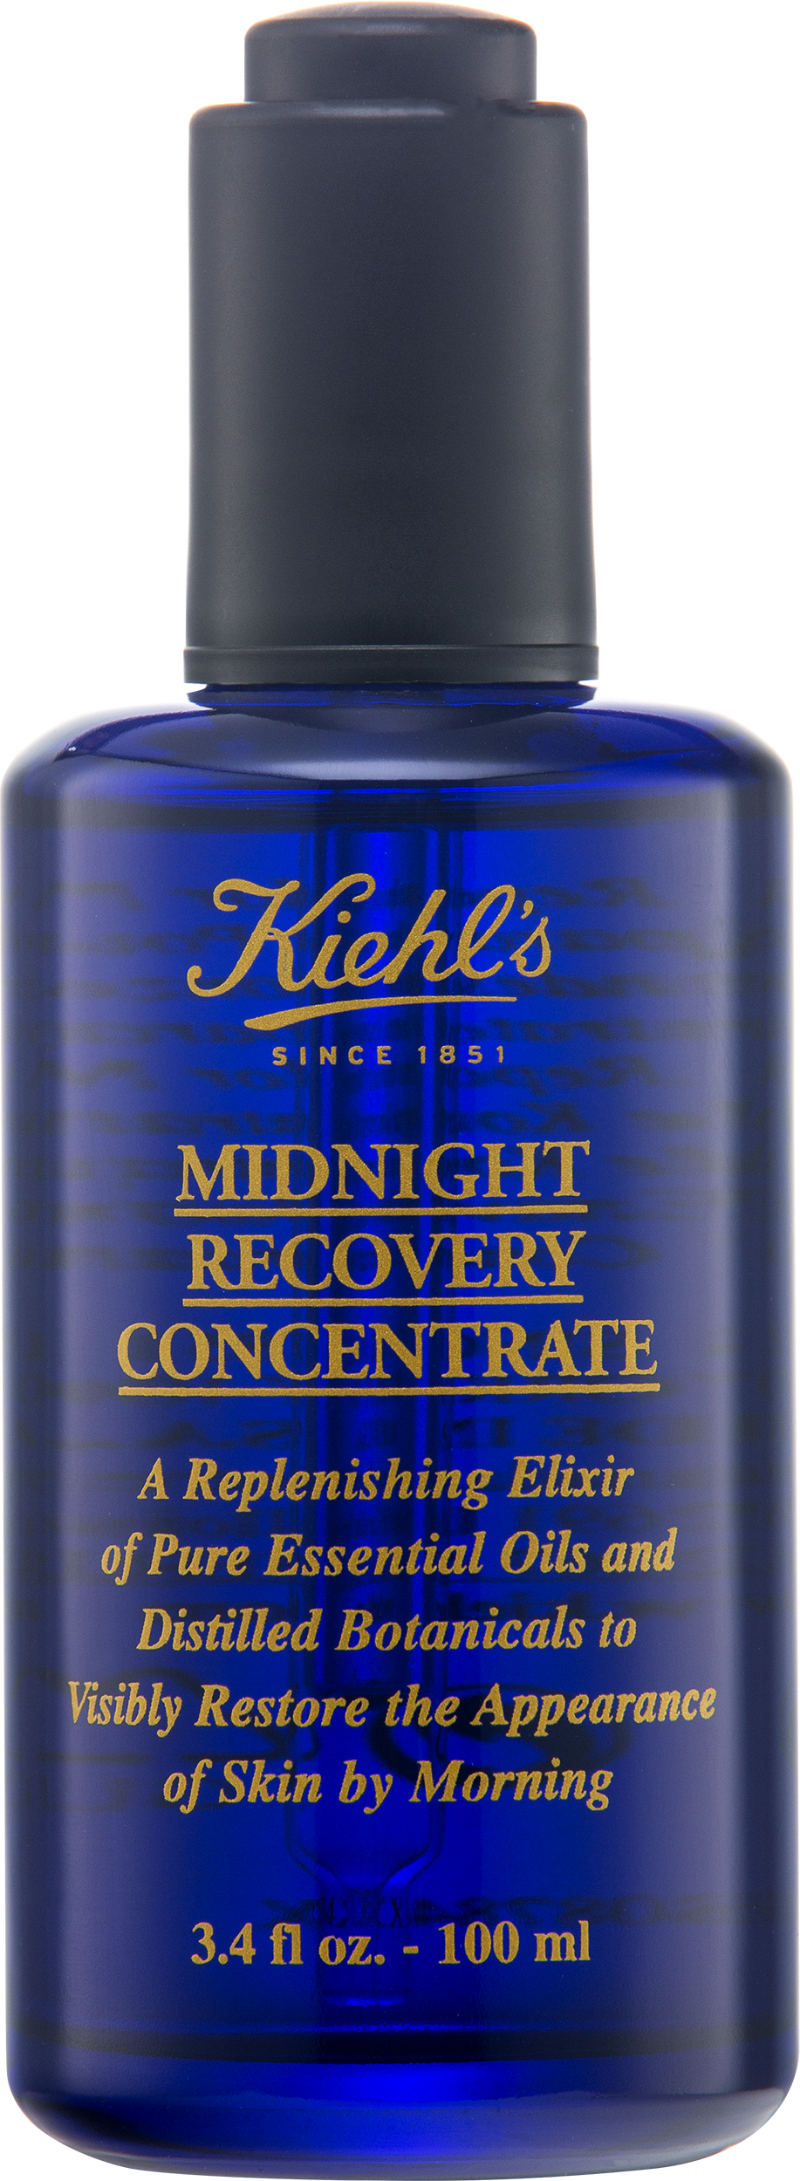 KiehlKiehl's midnight recover concentrate